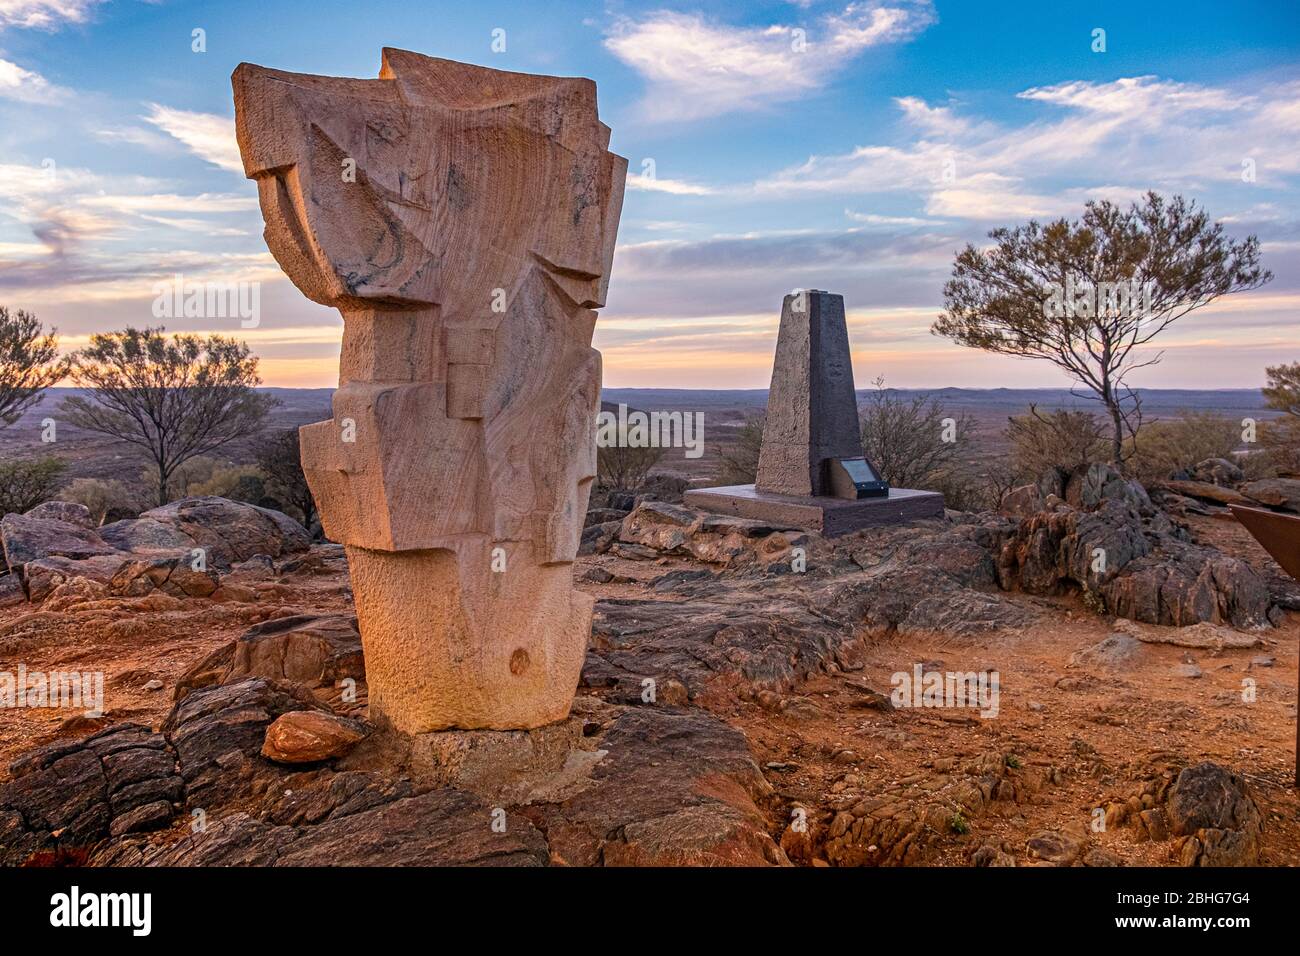 Sculpture Symposium, The Living Desert Reserve, Broken Hill, New South Wales (NSW), Australia. Stock Photo